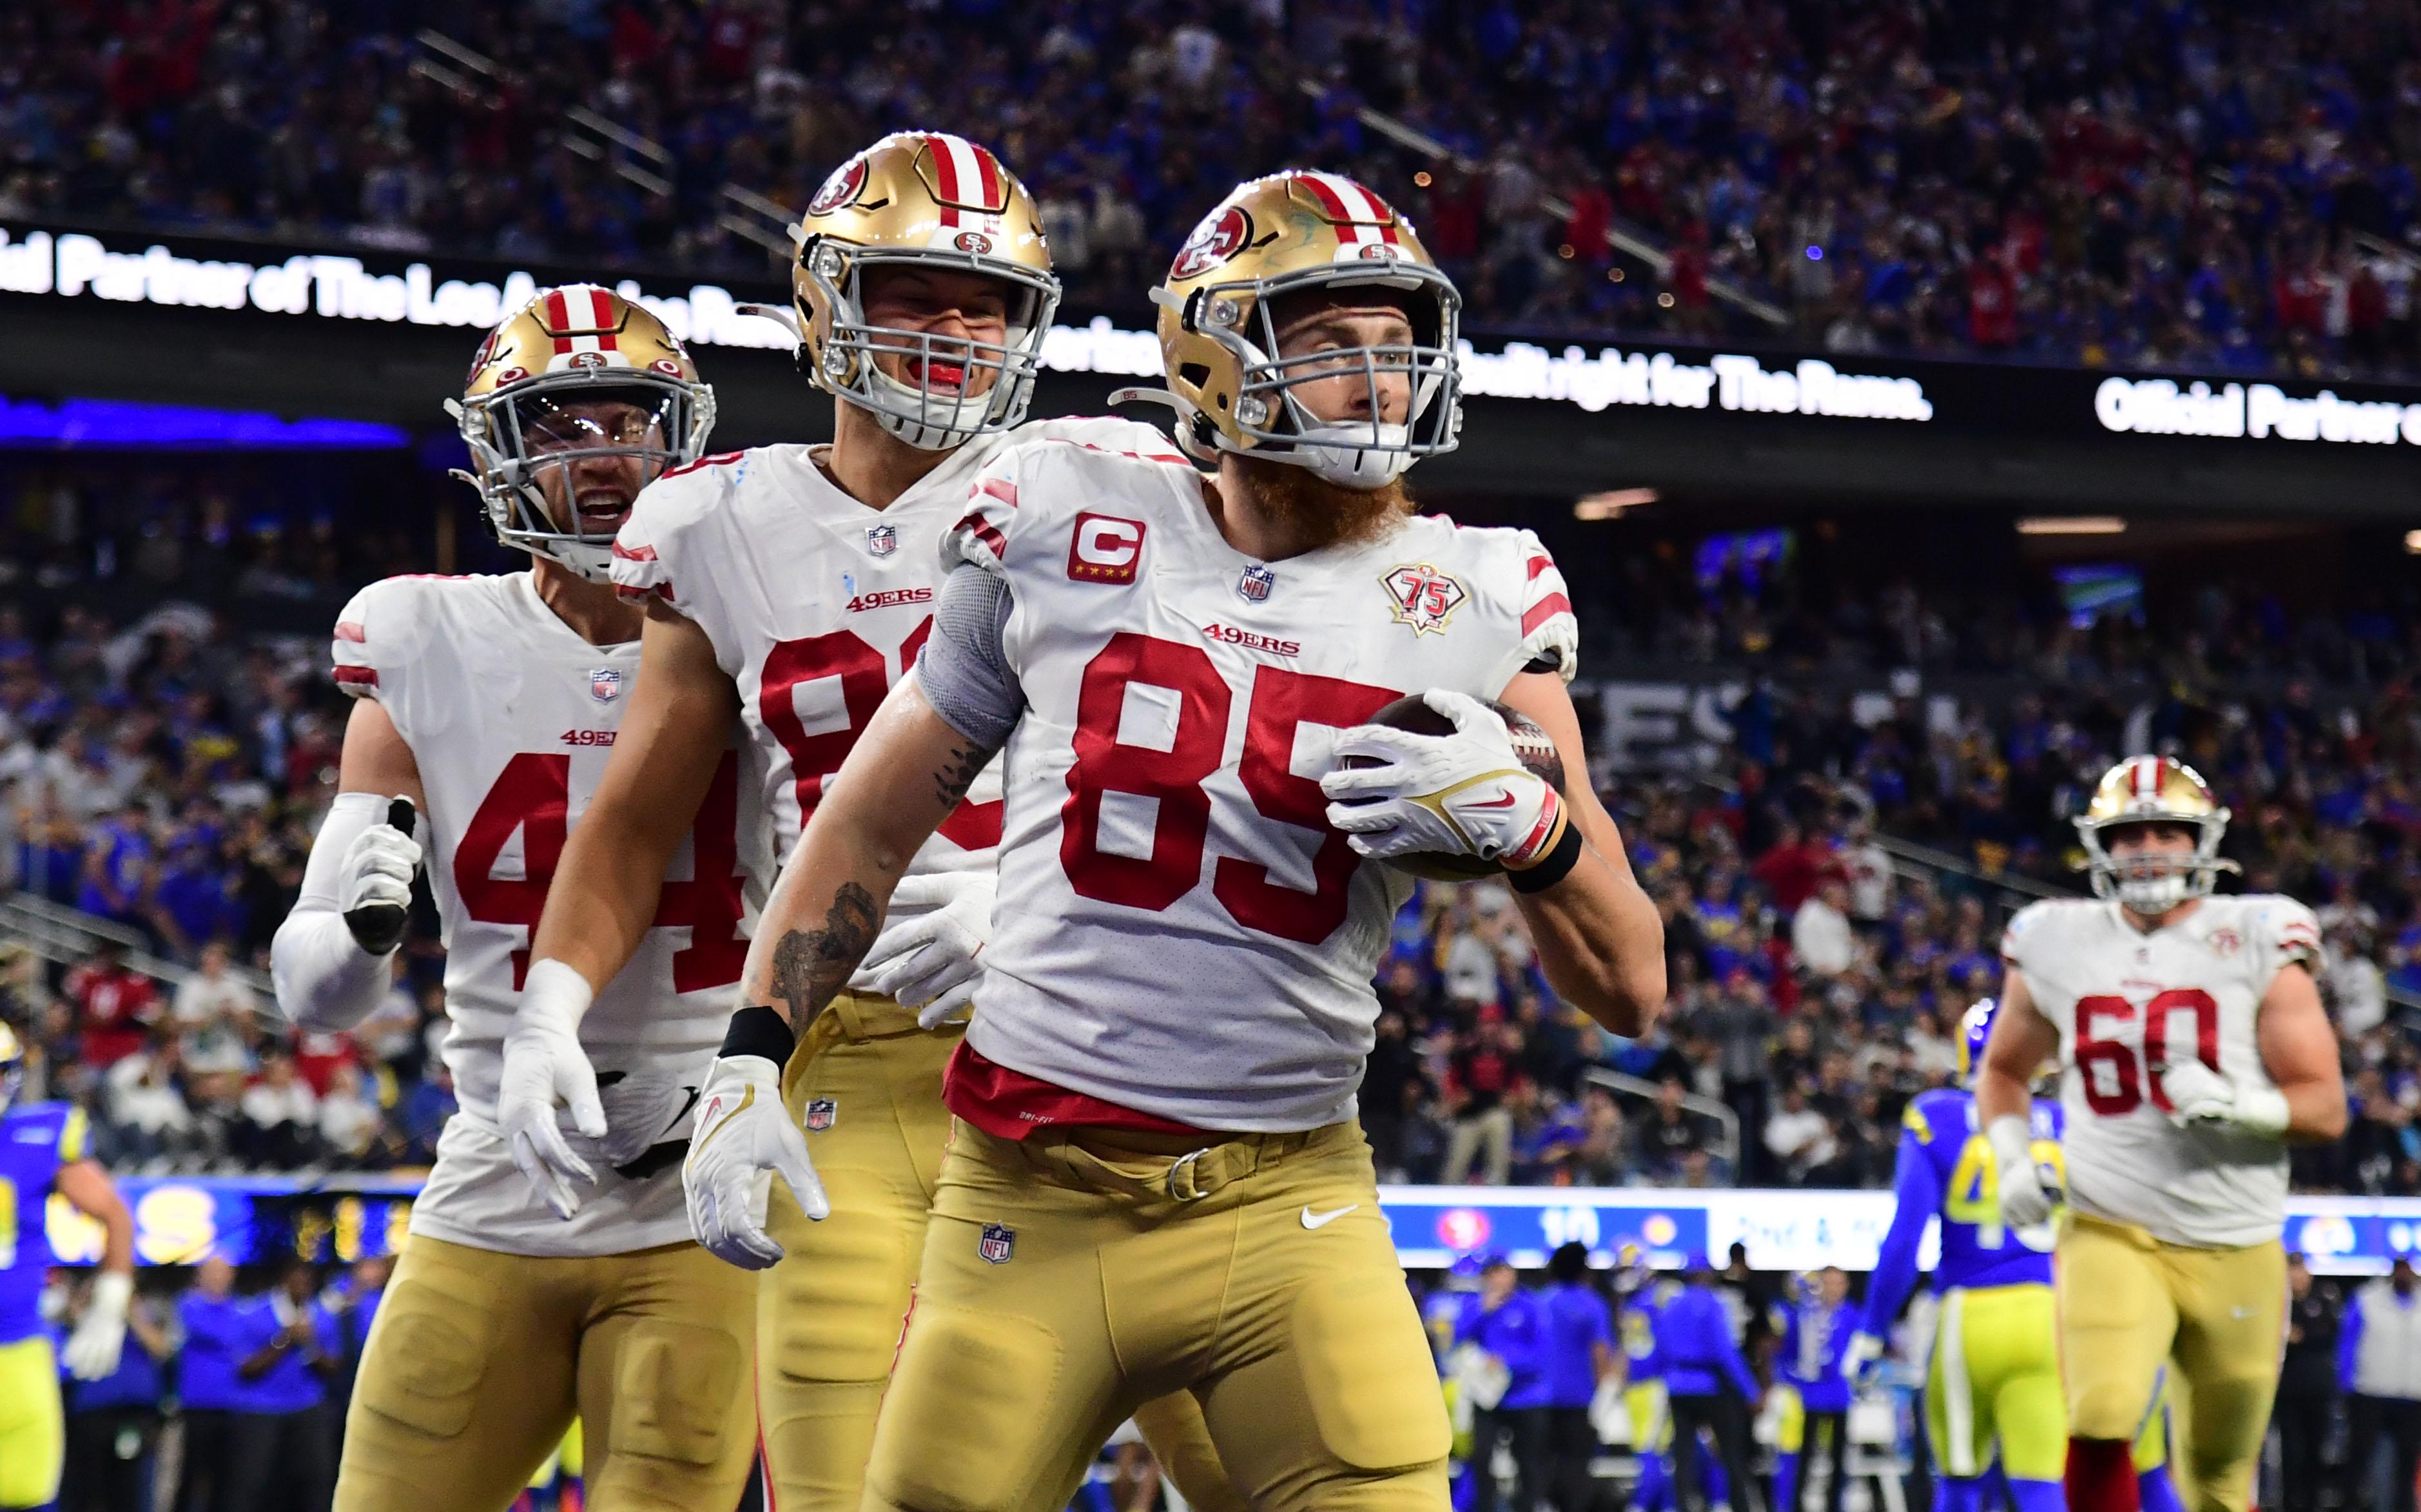 49ers playoff chances: How San Francisco can clinch NFC wild-card